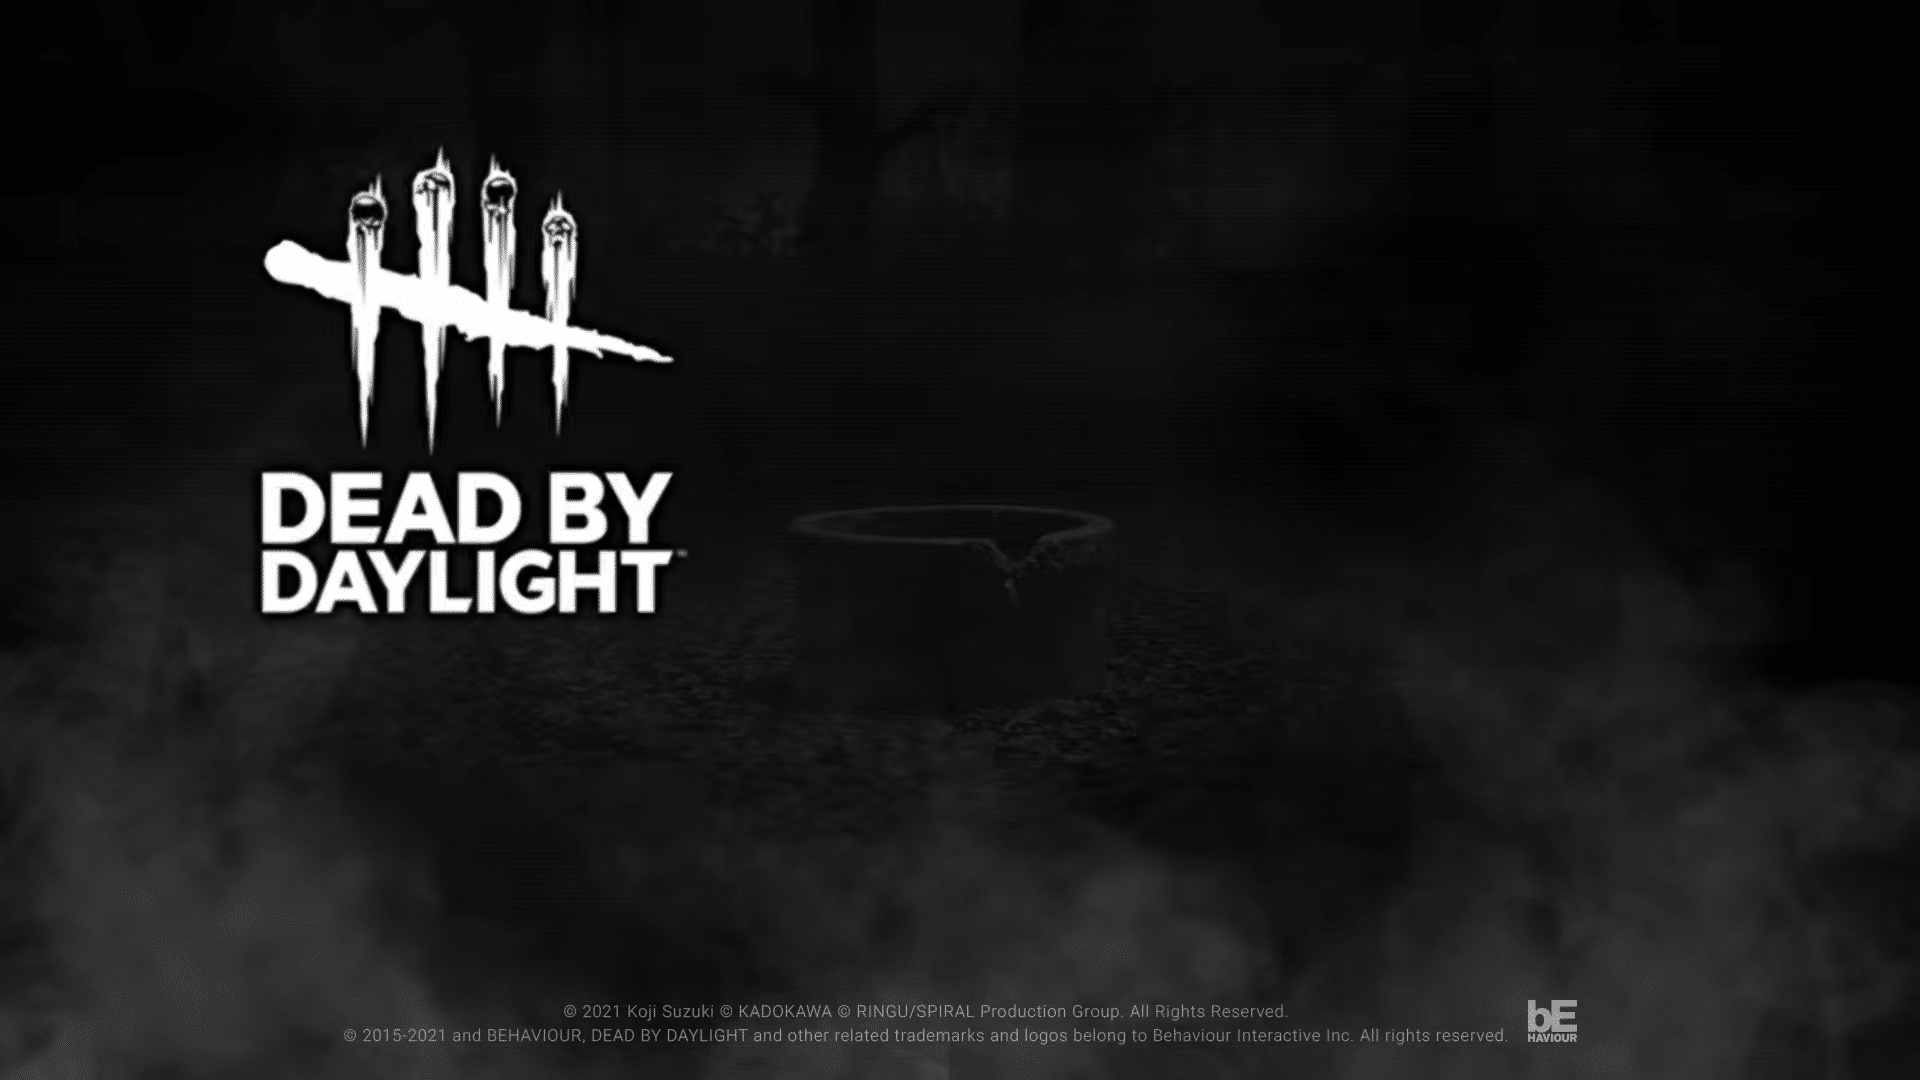 Next Dead By Daylight crossover is horror series Ringu